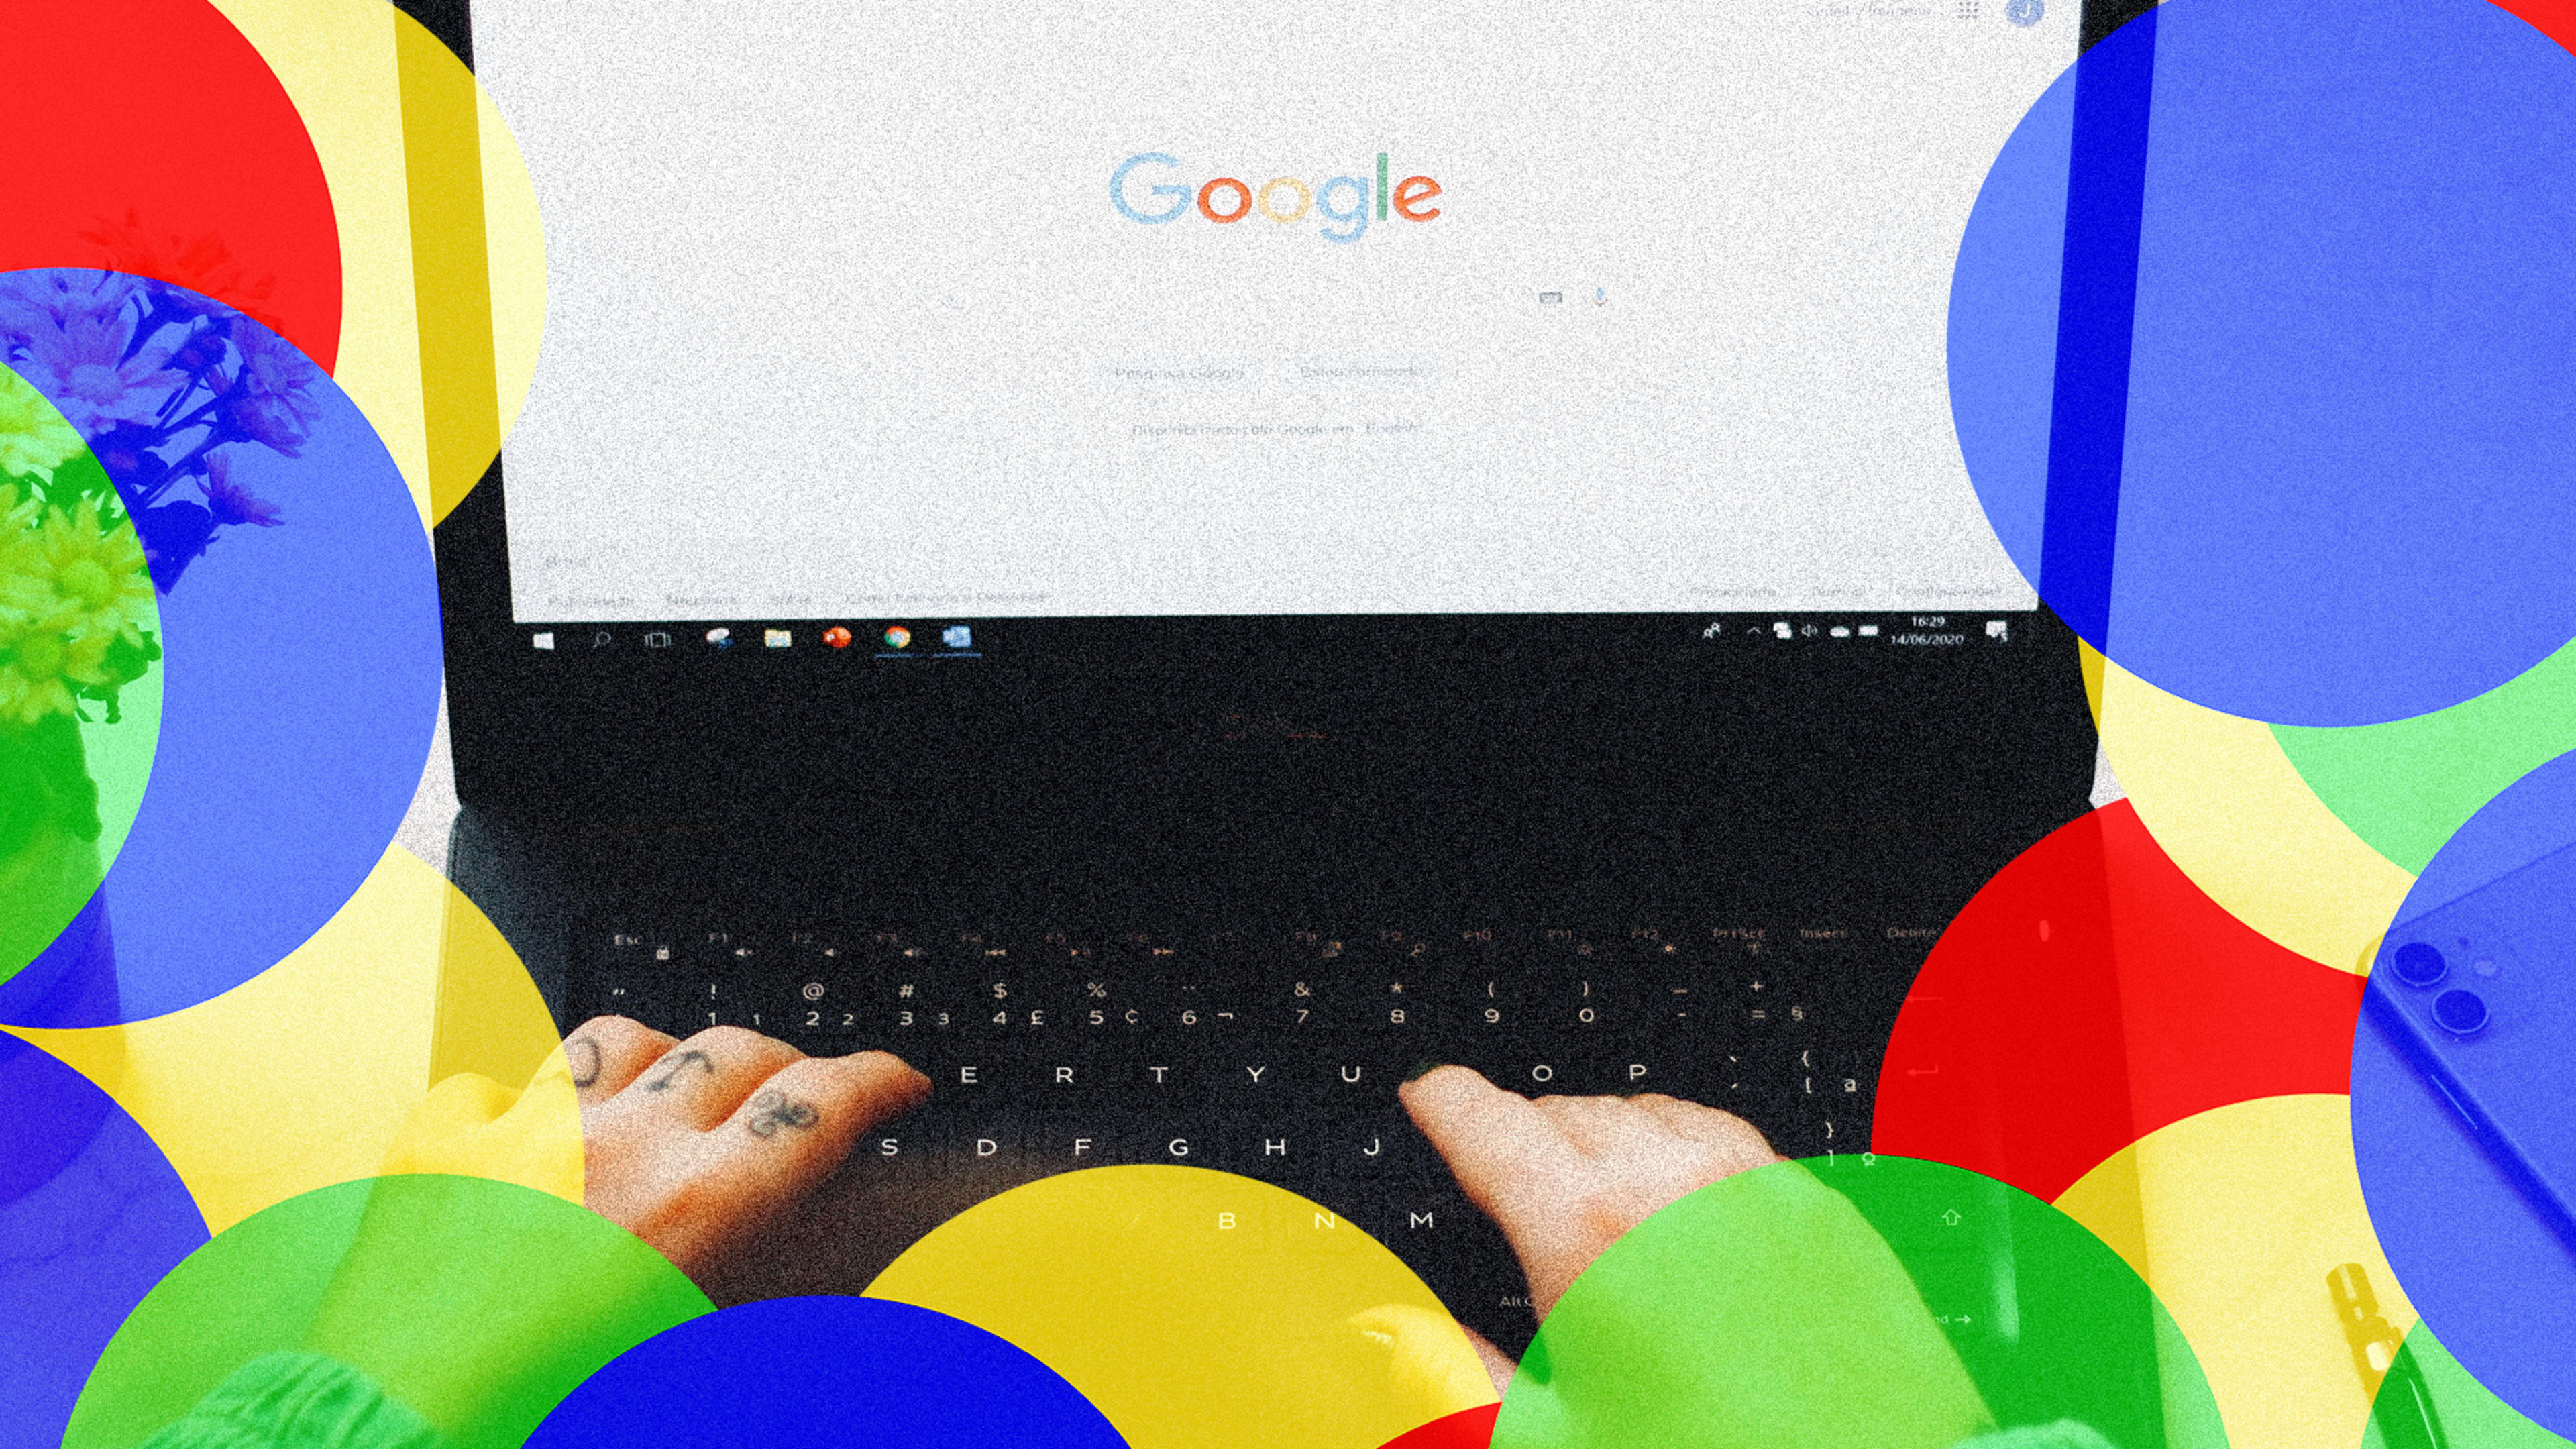 4 Google tricks to take your searches to the next level